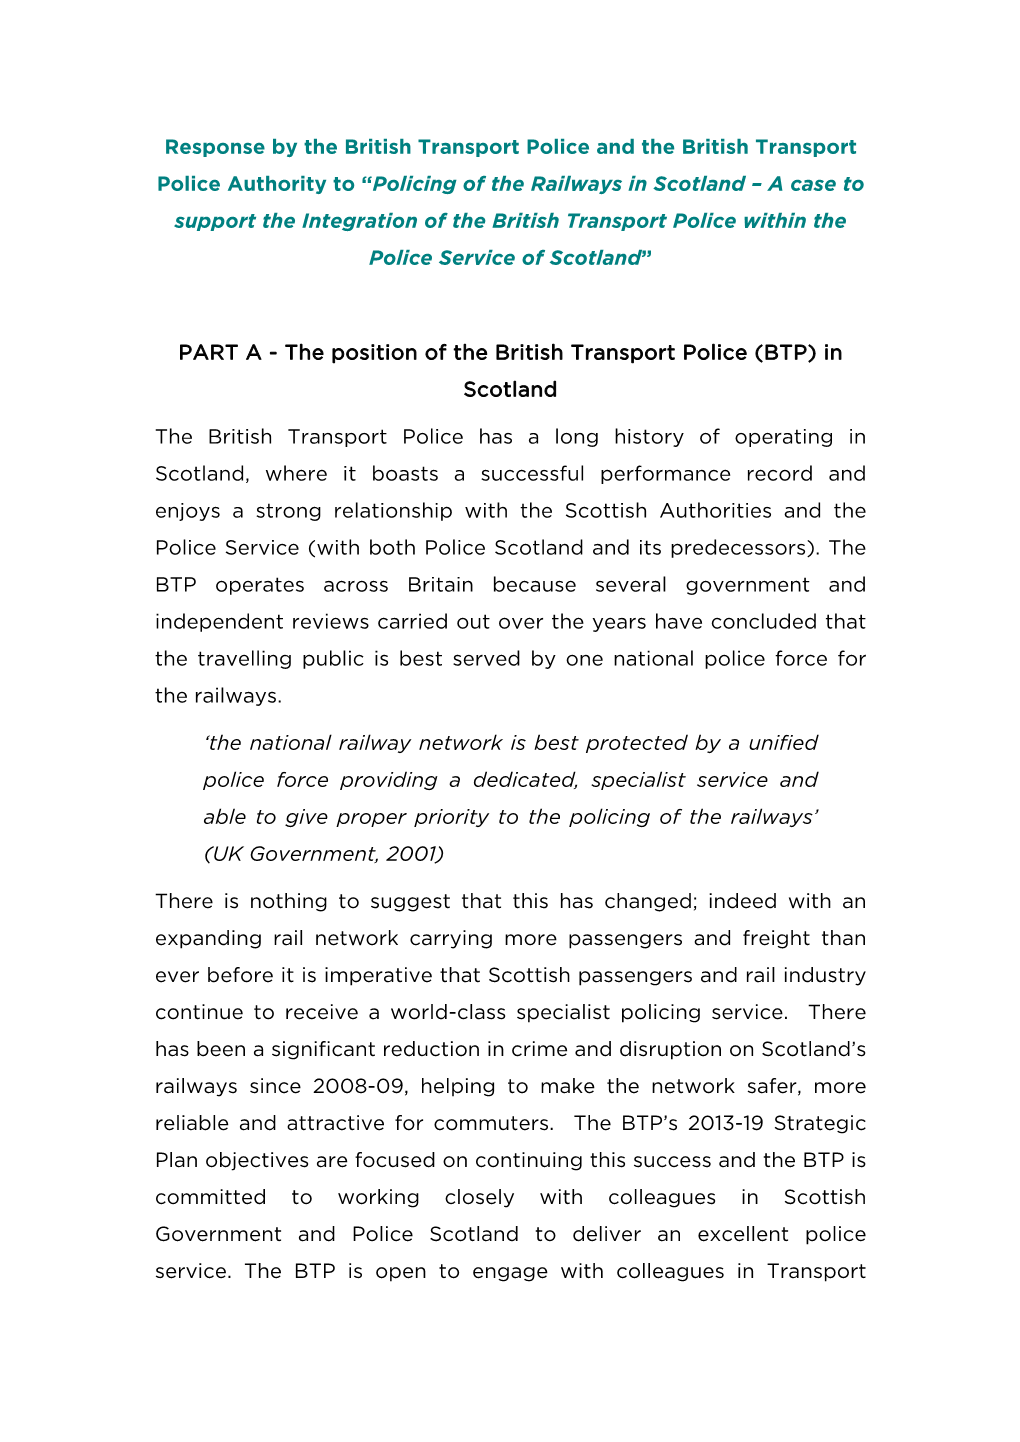 Response by the British Transport Police and the British Transport Police Authority to “Policing of the Railways in Scotland